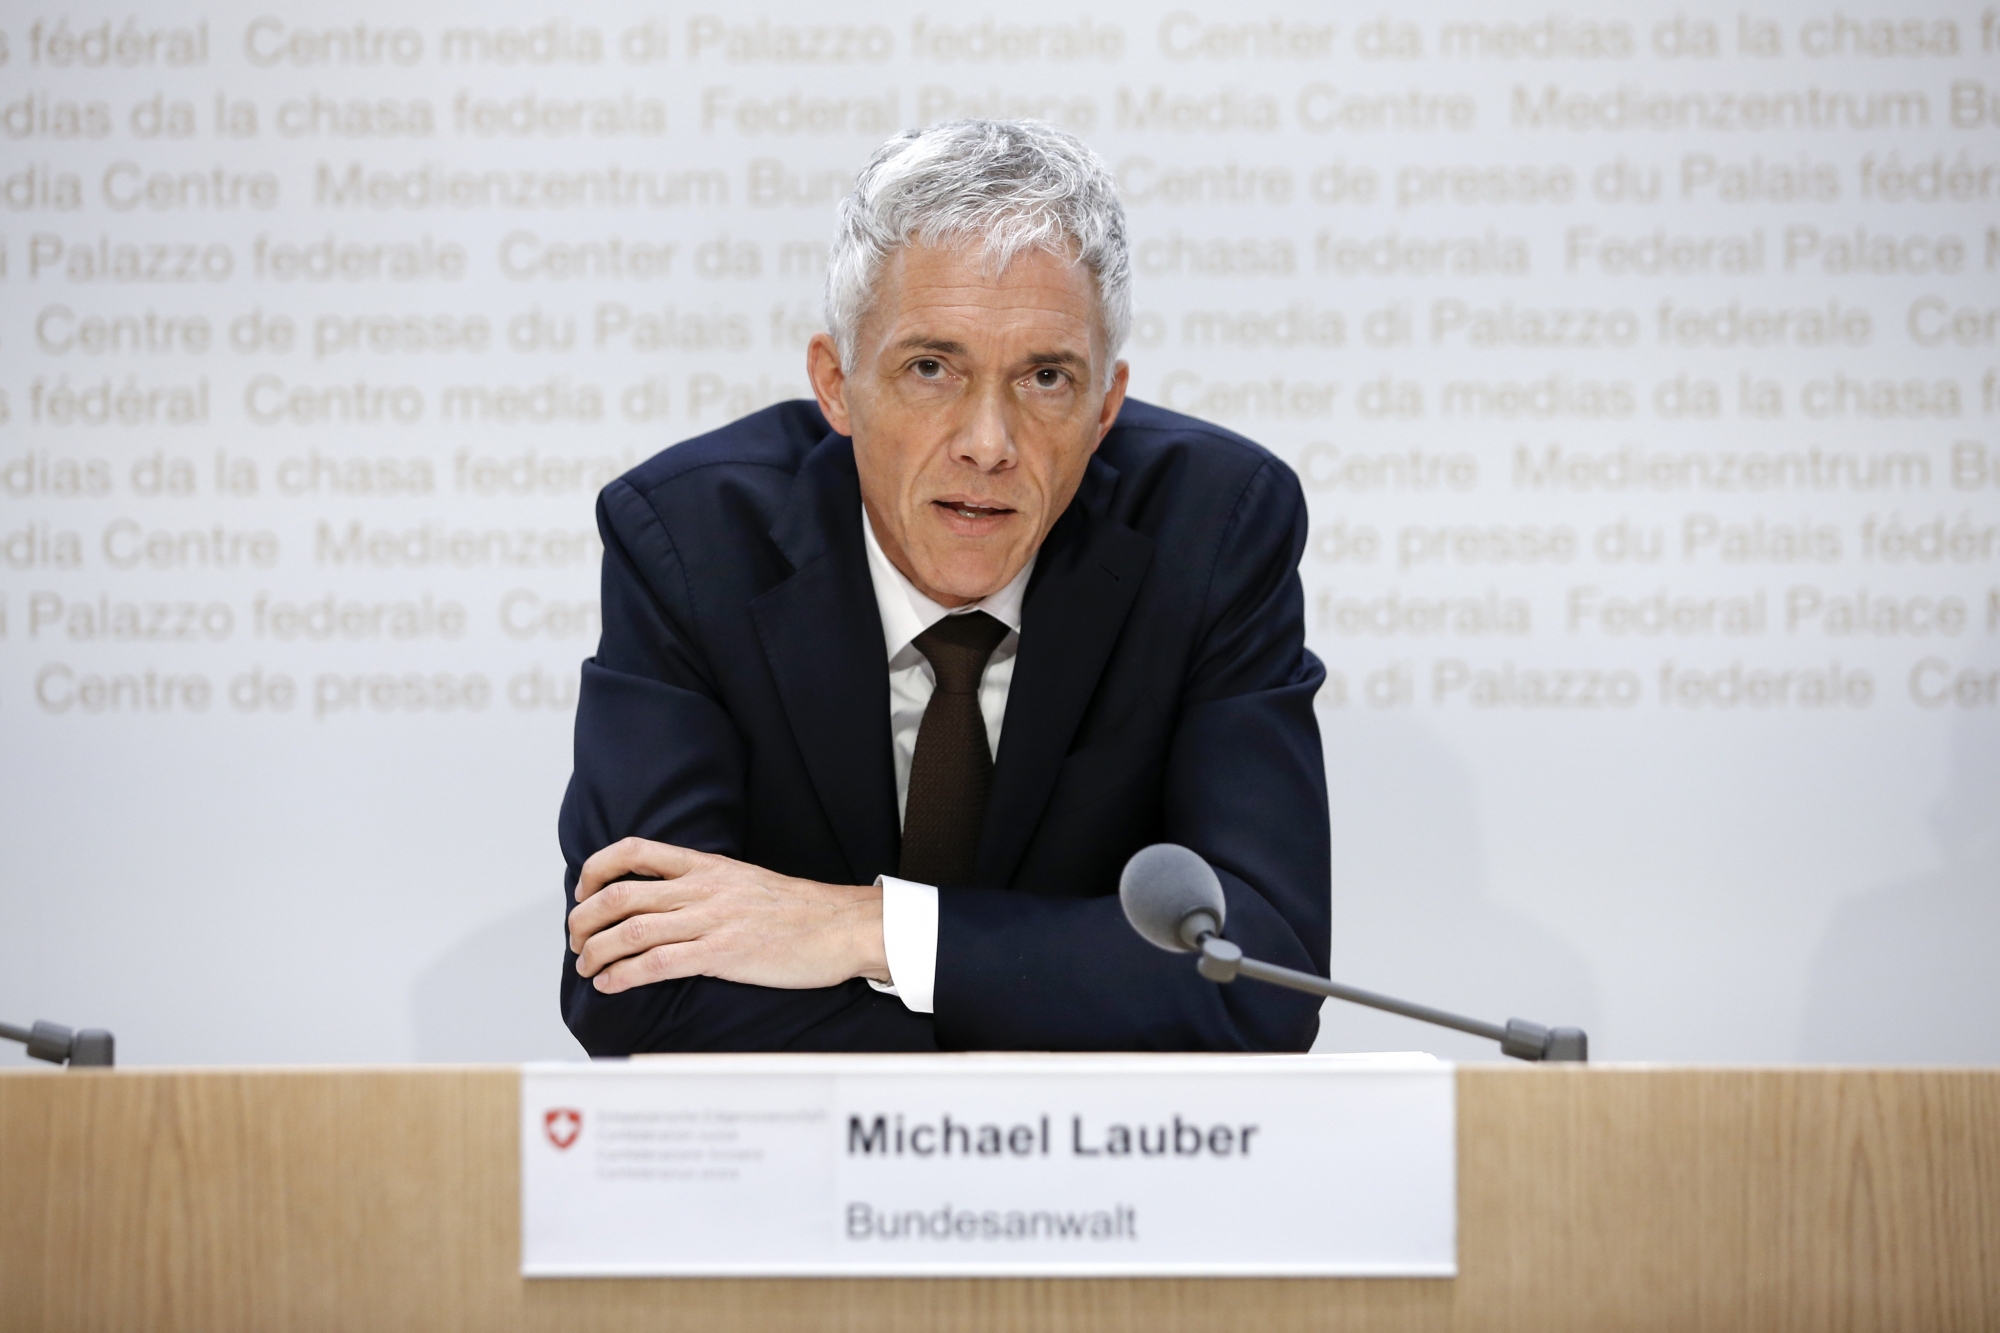 ARCHIV ZUR AUFHEBUNG DER IMMUNITAET VON BUNDESANWALT LAUBER, AM MONTAG, 24. AUGUST 2020 - Swiss Federal Attorney Michael Lauber speaks during a media conference at the Media Centre of the Federal Parliament in Bern, Switzerland, on Friday, 10 May 2019. Federal Attorney Michael Lauber is criticised for informal meetings with FIFA head Gianni Infantino. The supervisory authority for the Federal Prosecutor's Office is opening a disciplinary investigation against Lauber. (KEYSTONE/Peter Klaunzer) ArcInfo